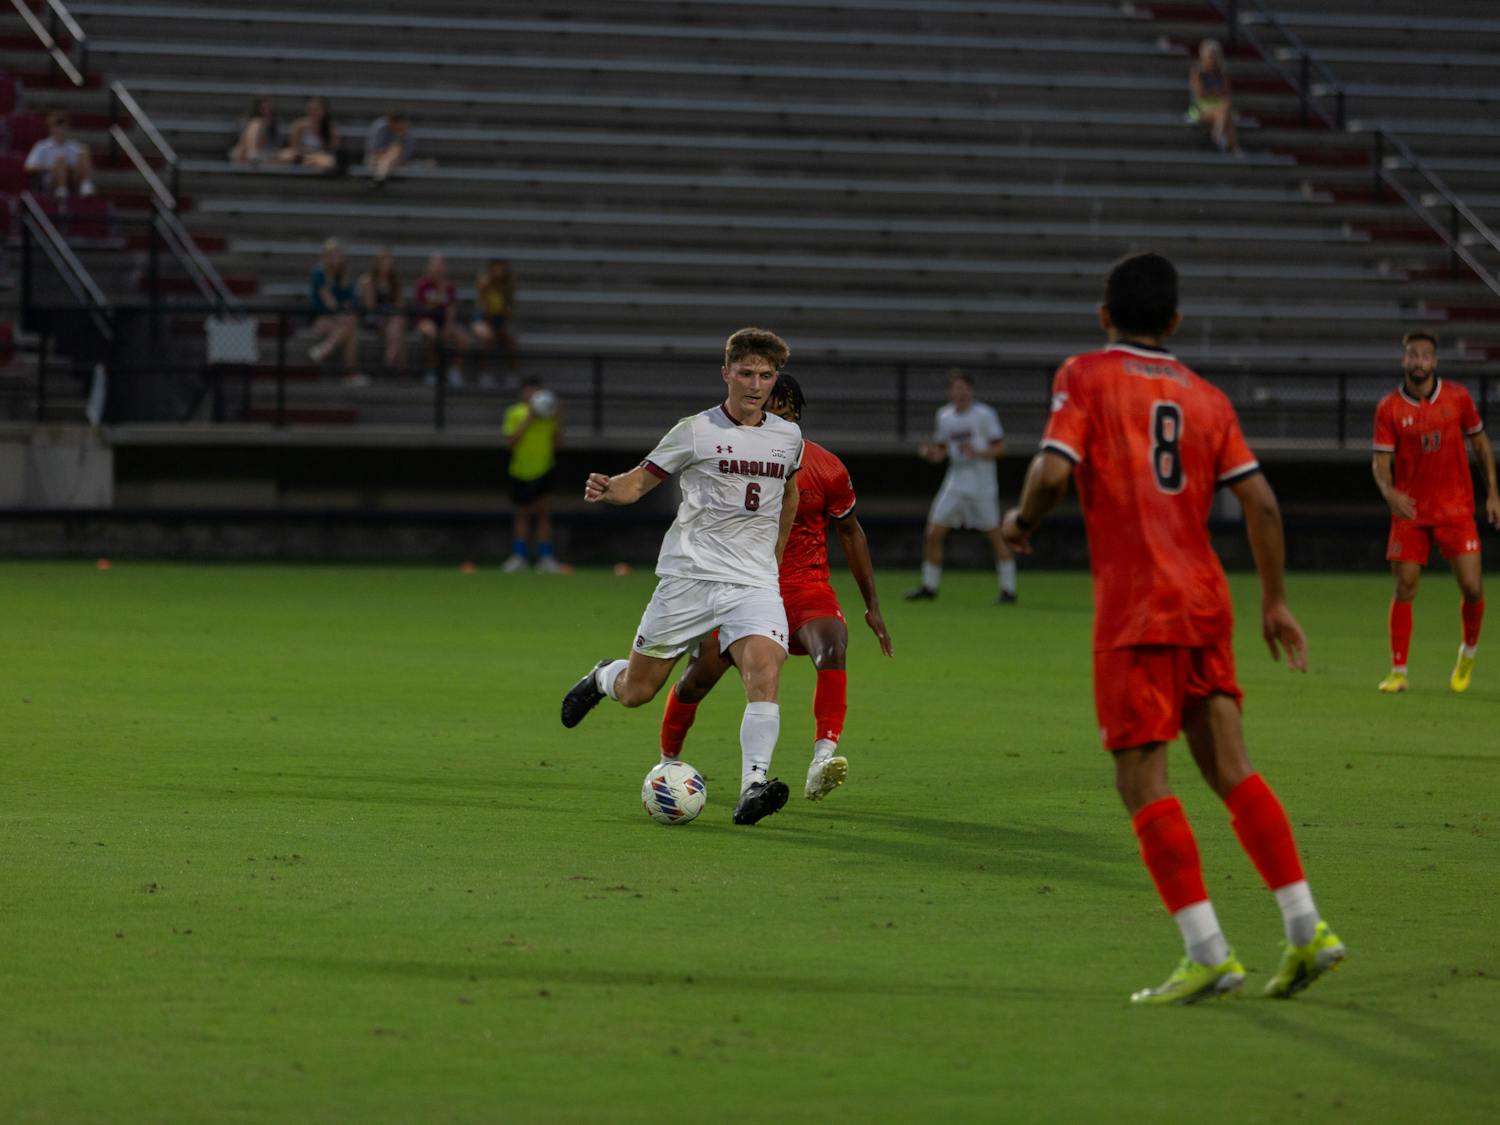 Senior mid-fielder Laurits Lillemose looks for a teammate to pass to after stealing the ball from an opponent during a game against Campbell on Sept. 17, 2022. South Carolina defeated Campbell Camels 1-0